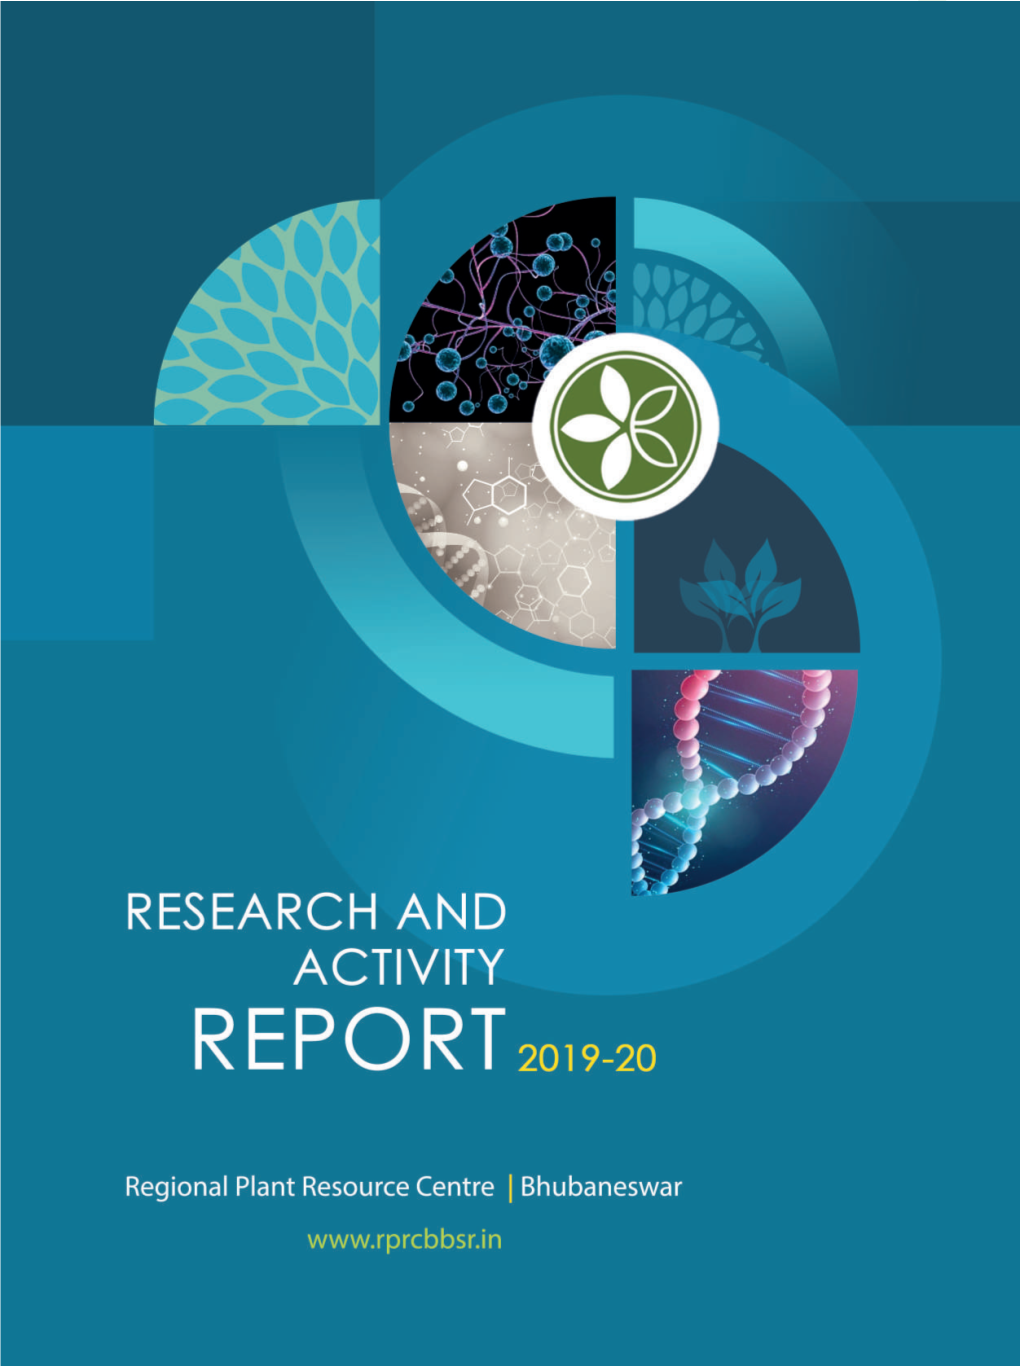 Research & Activity Report 2019-20